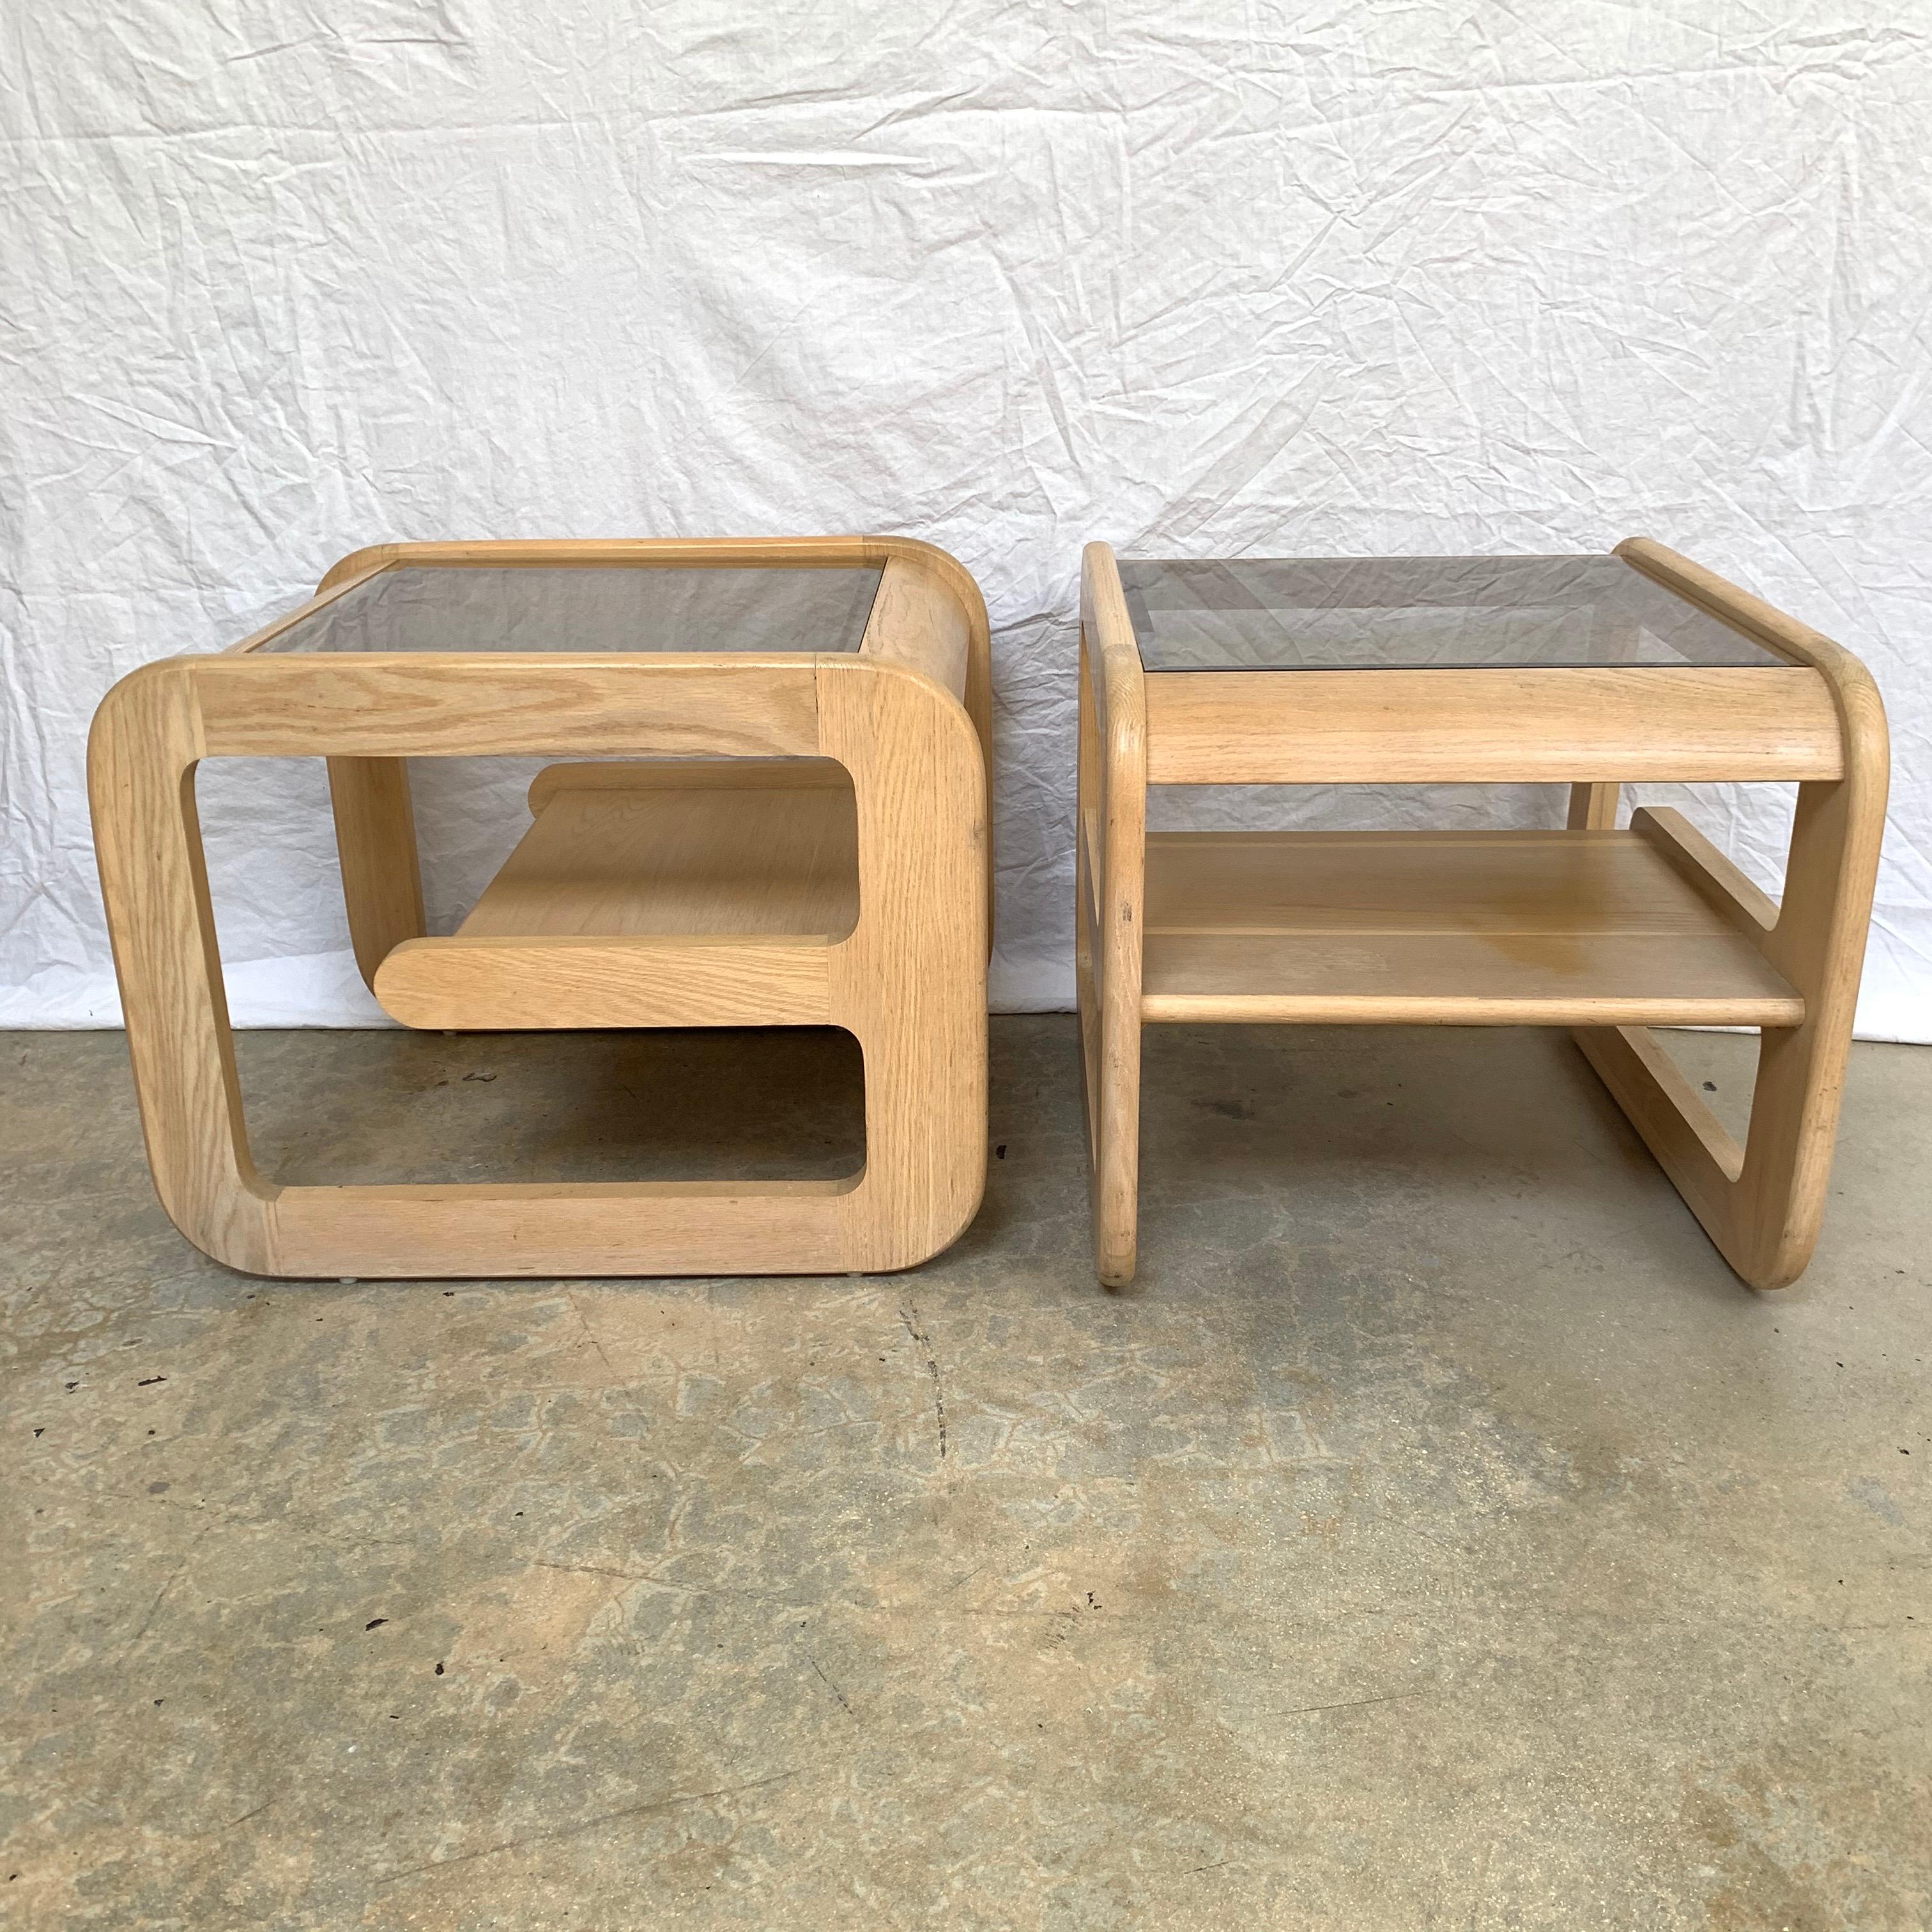 Sculptural pair of organic California modern end or side tables rendered in an original bleached white oak finish with smoked beveled glass tops and in internal oak shelf by Mersman, USA, 1970s.